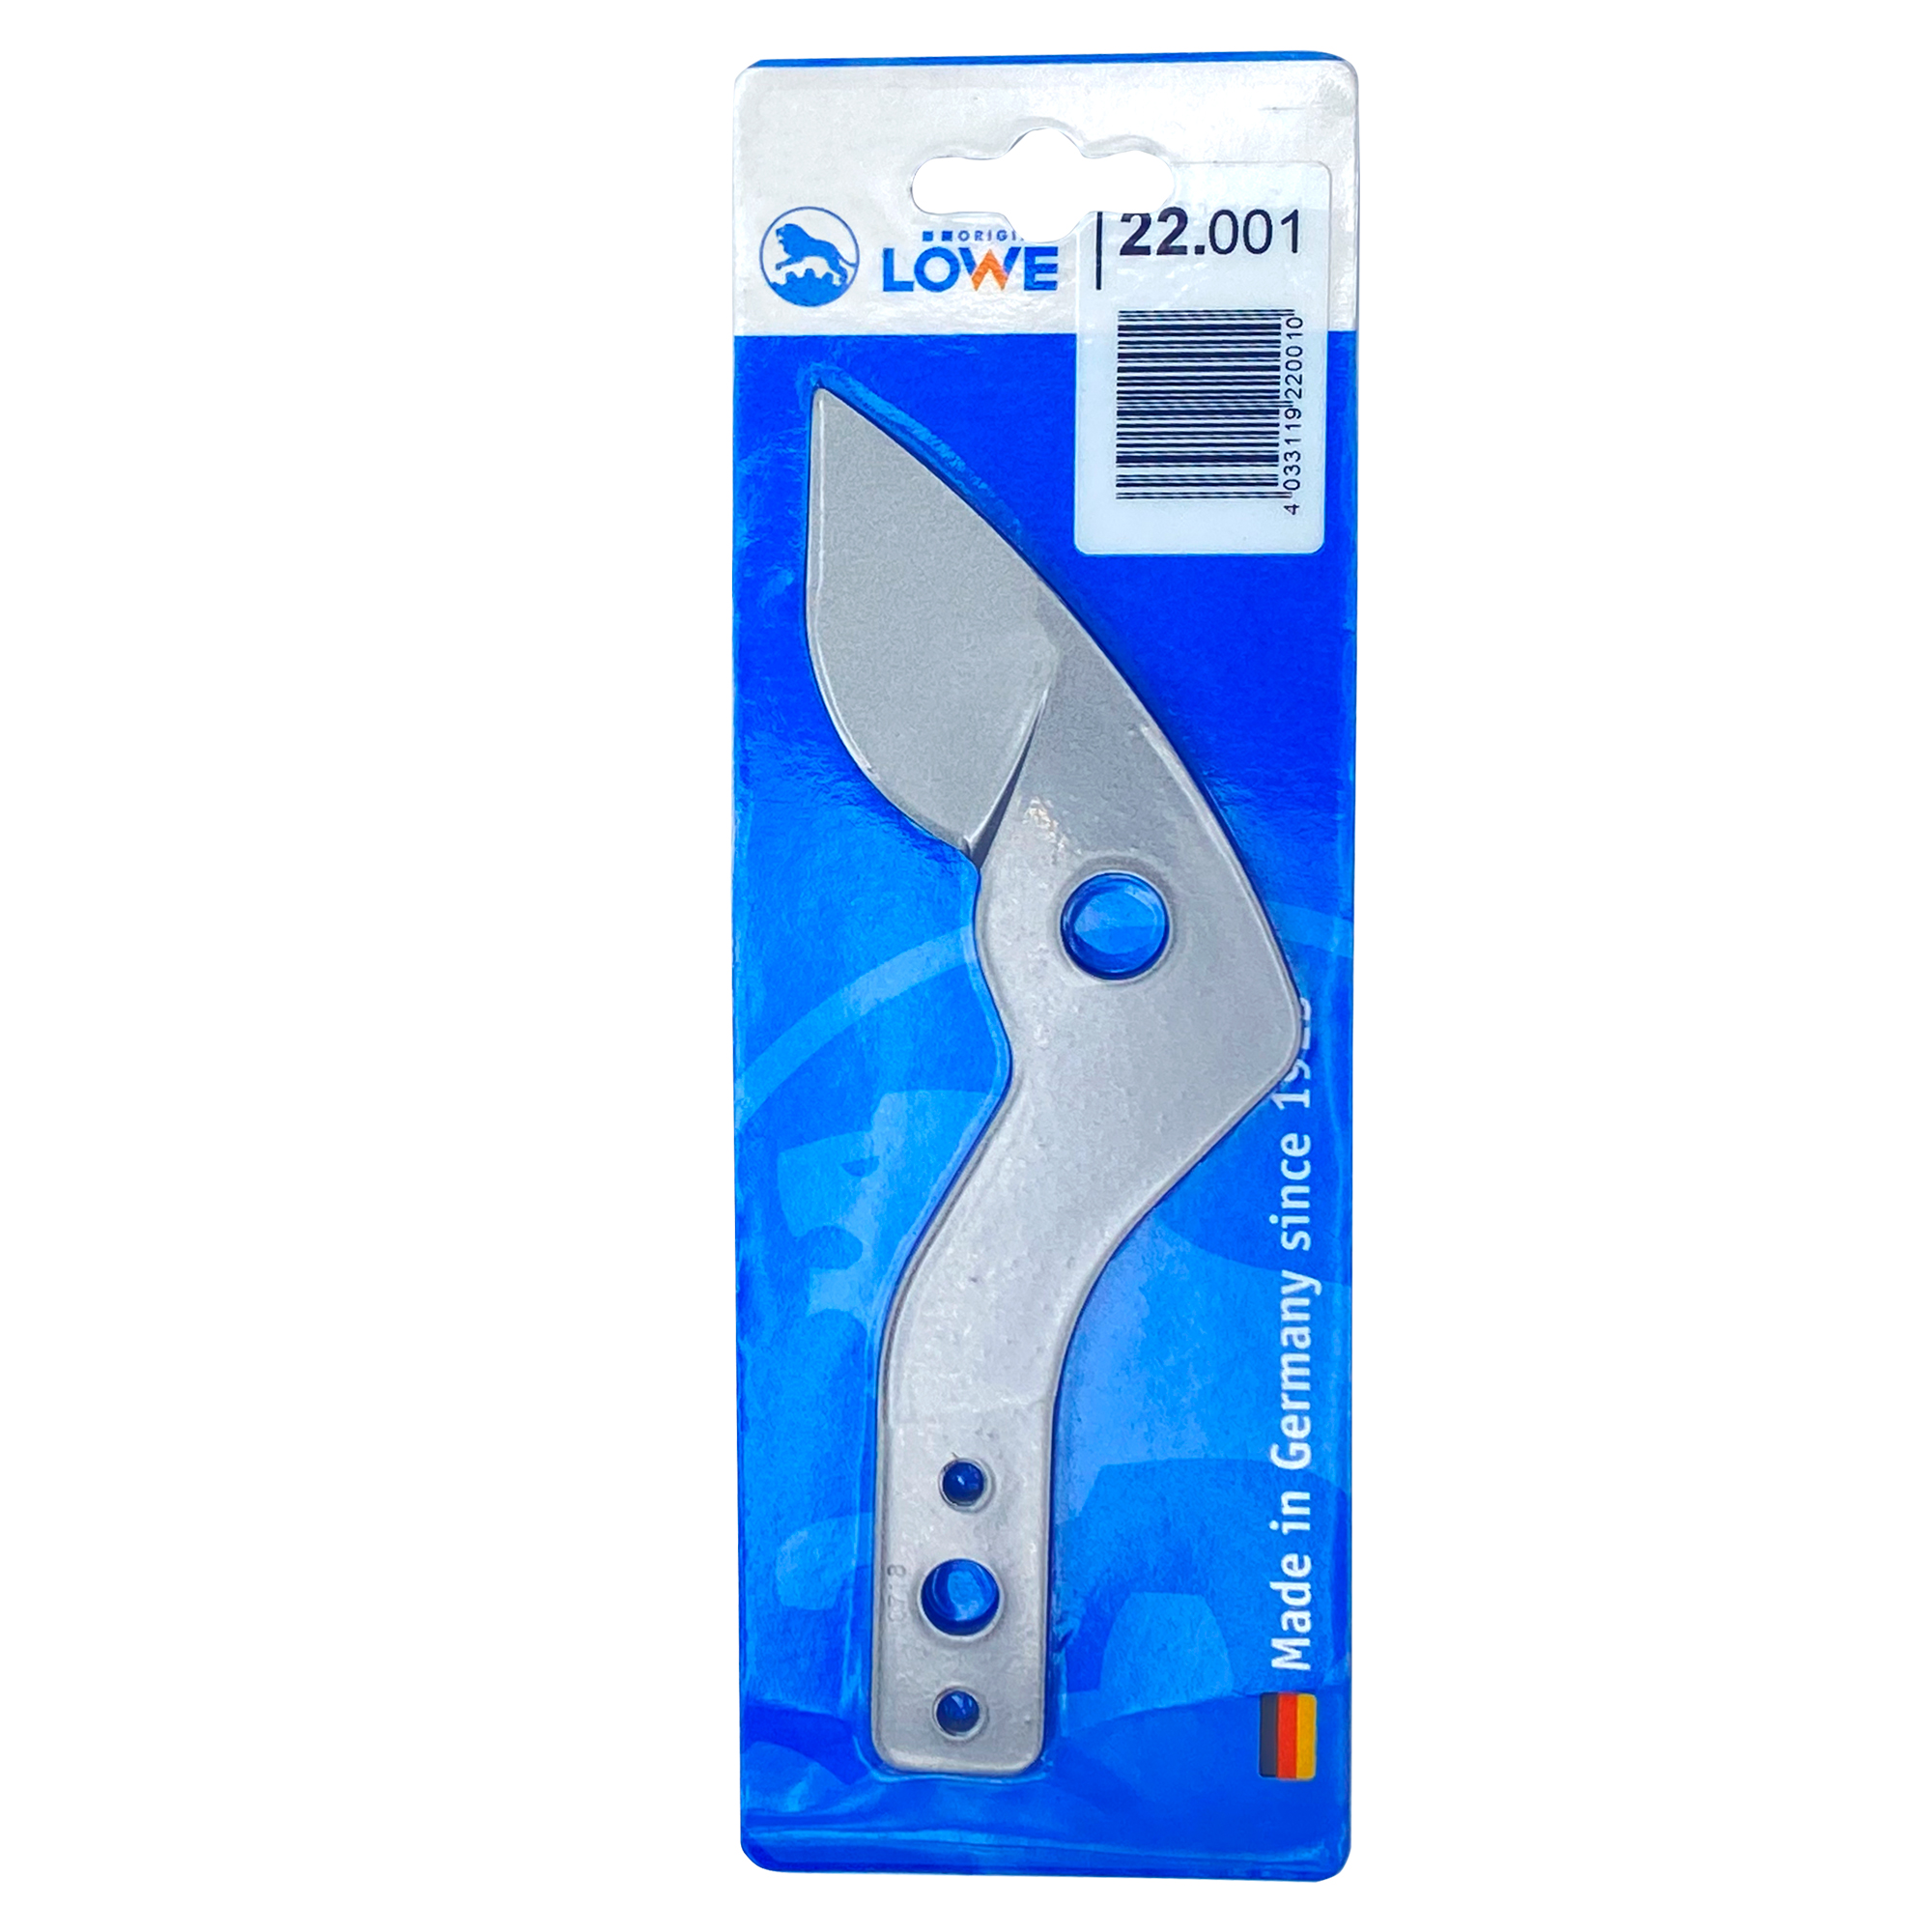 Blade LÖWE 22, 1 piece in blister pack